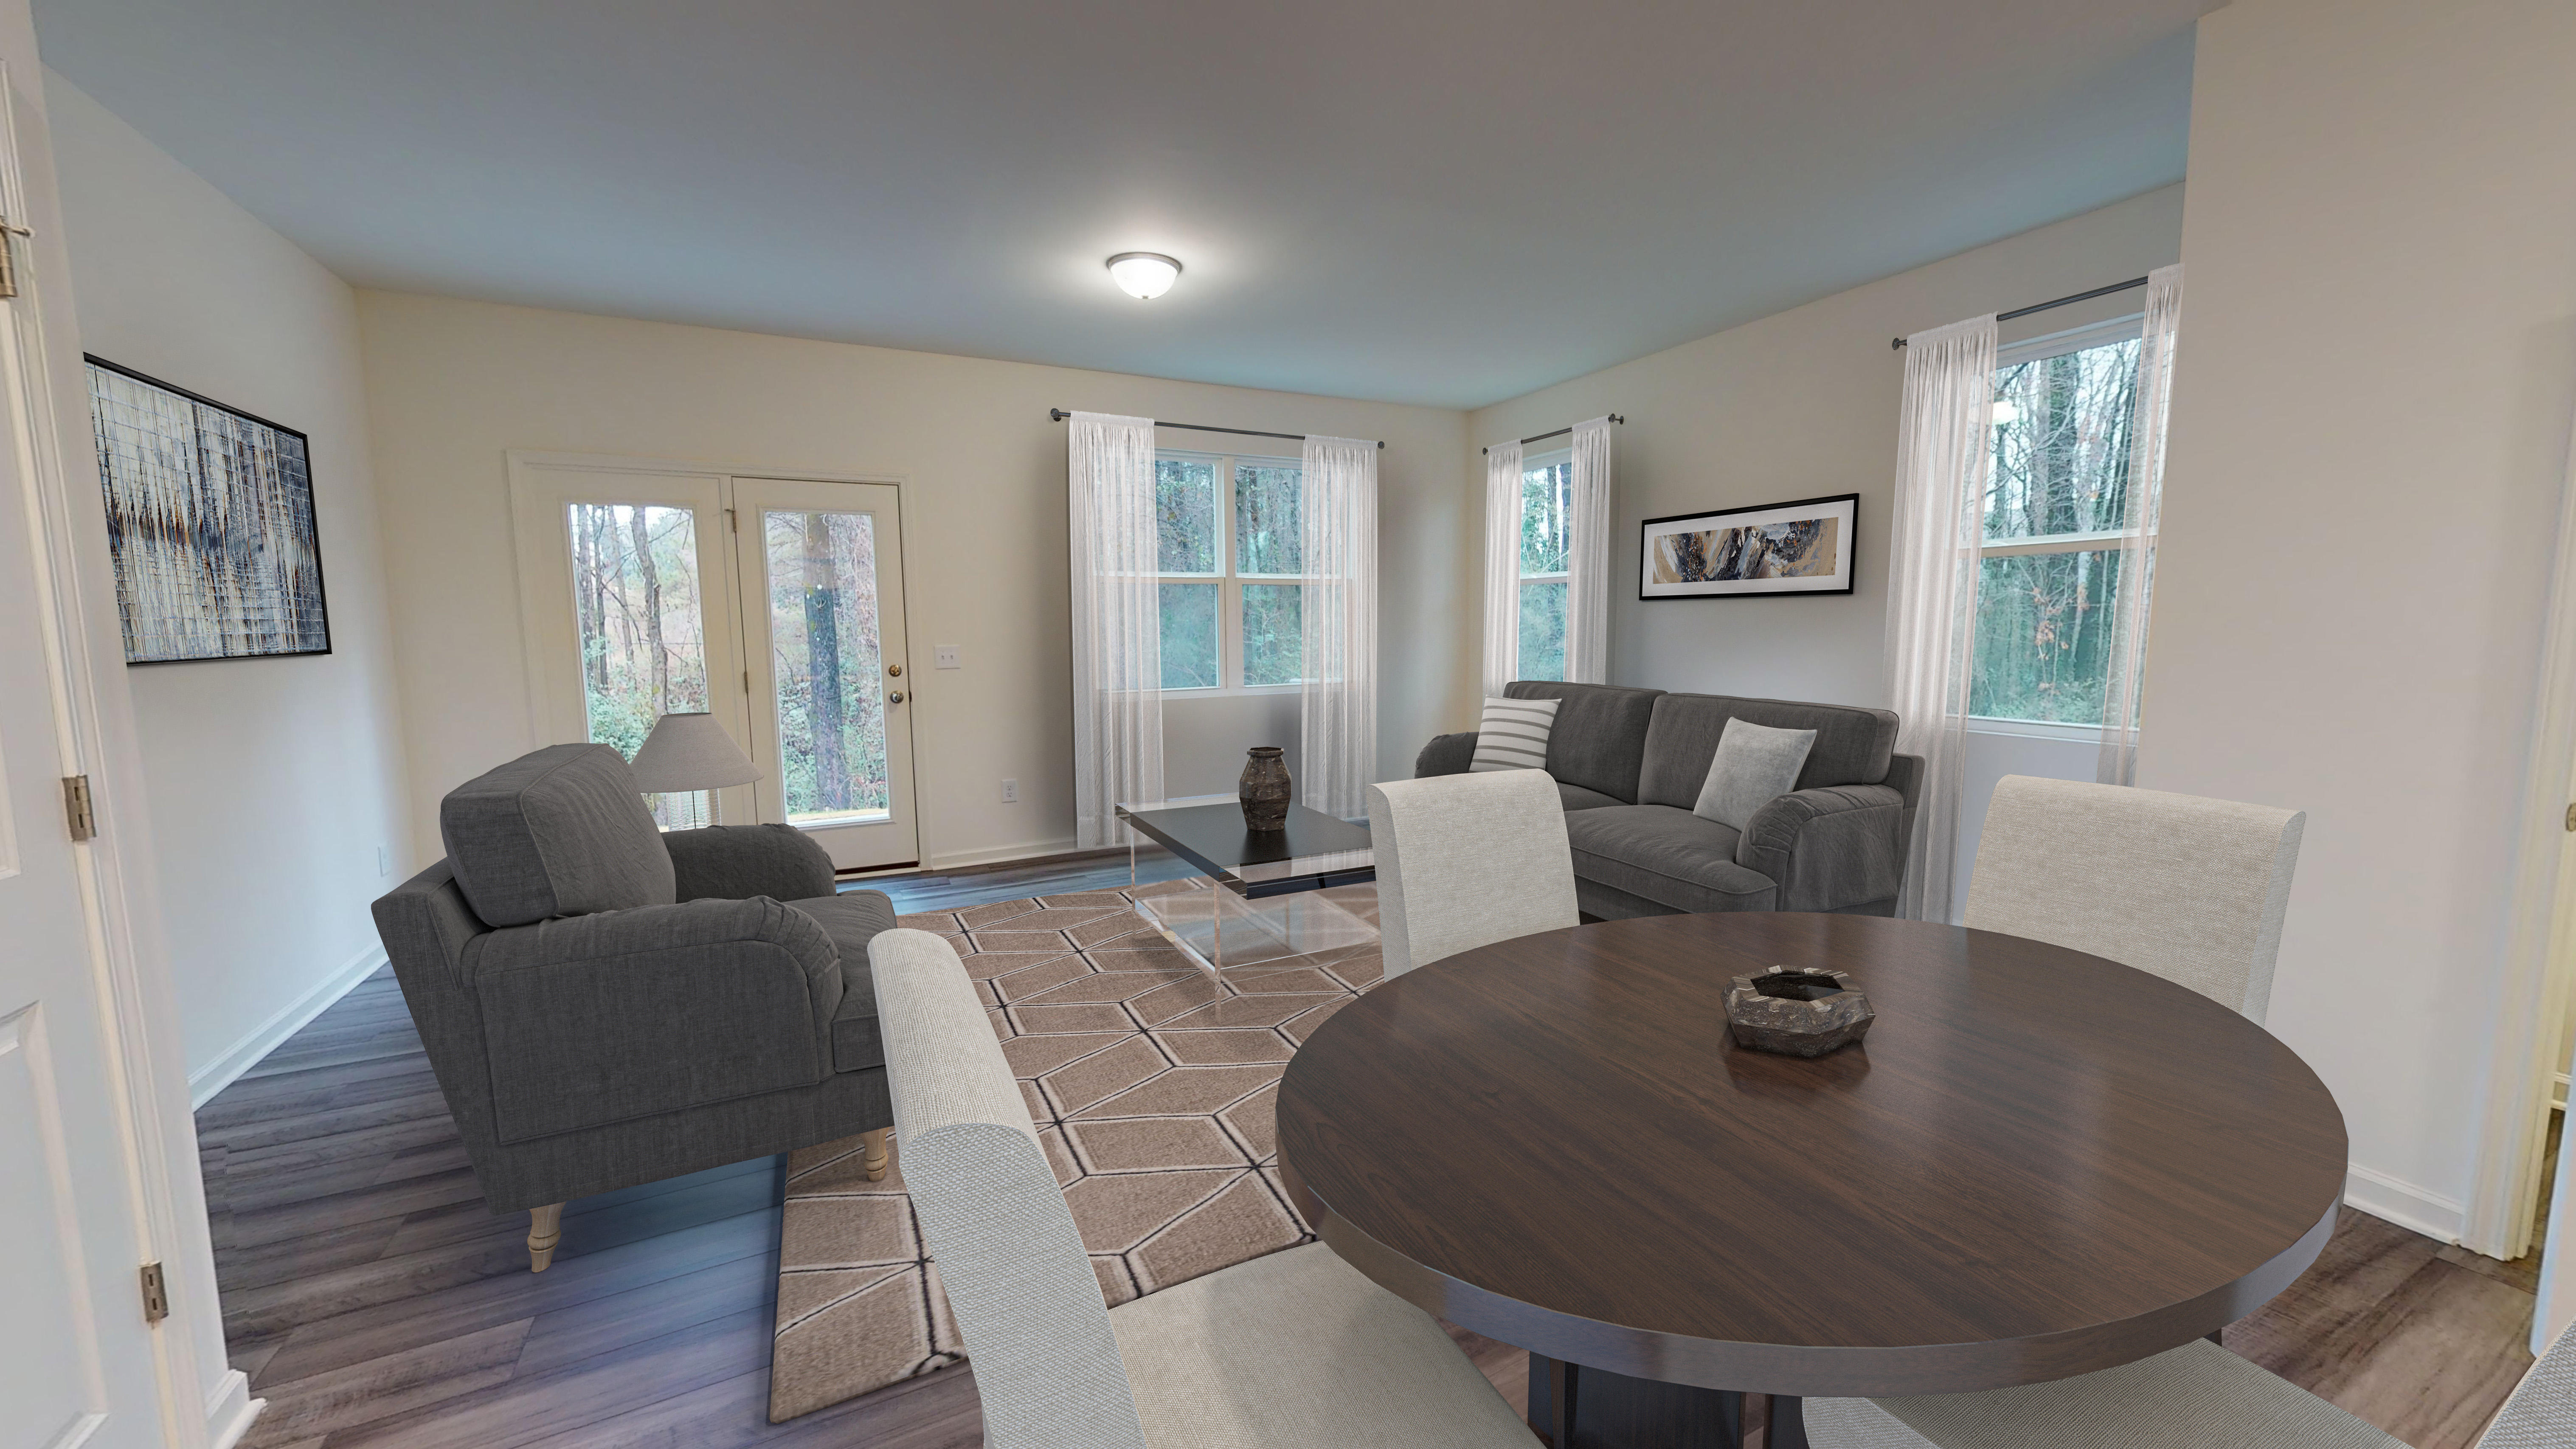 Check out our Pulsar plan in our Palmetto, GA new home neighborhood, Palmetto Cove!